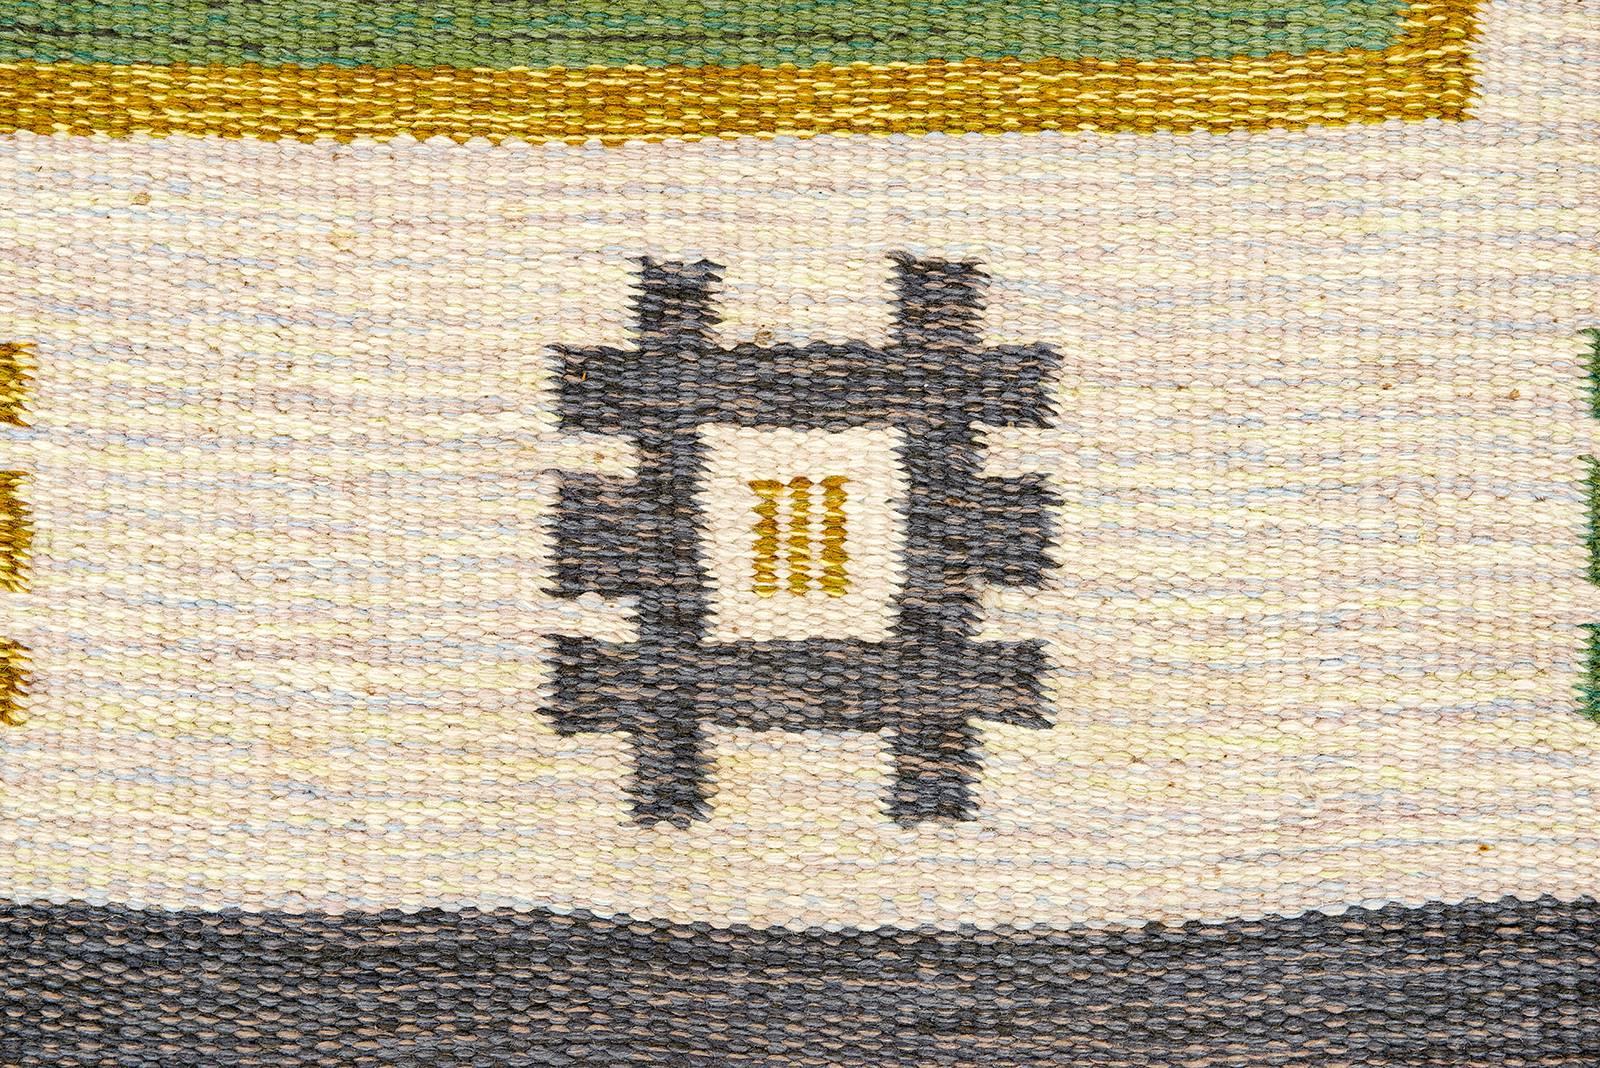 Hand-Woven Vintage Swedish Flat-Weave Carpet Signed AW